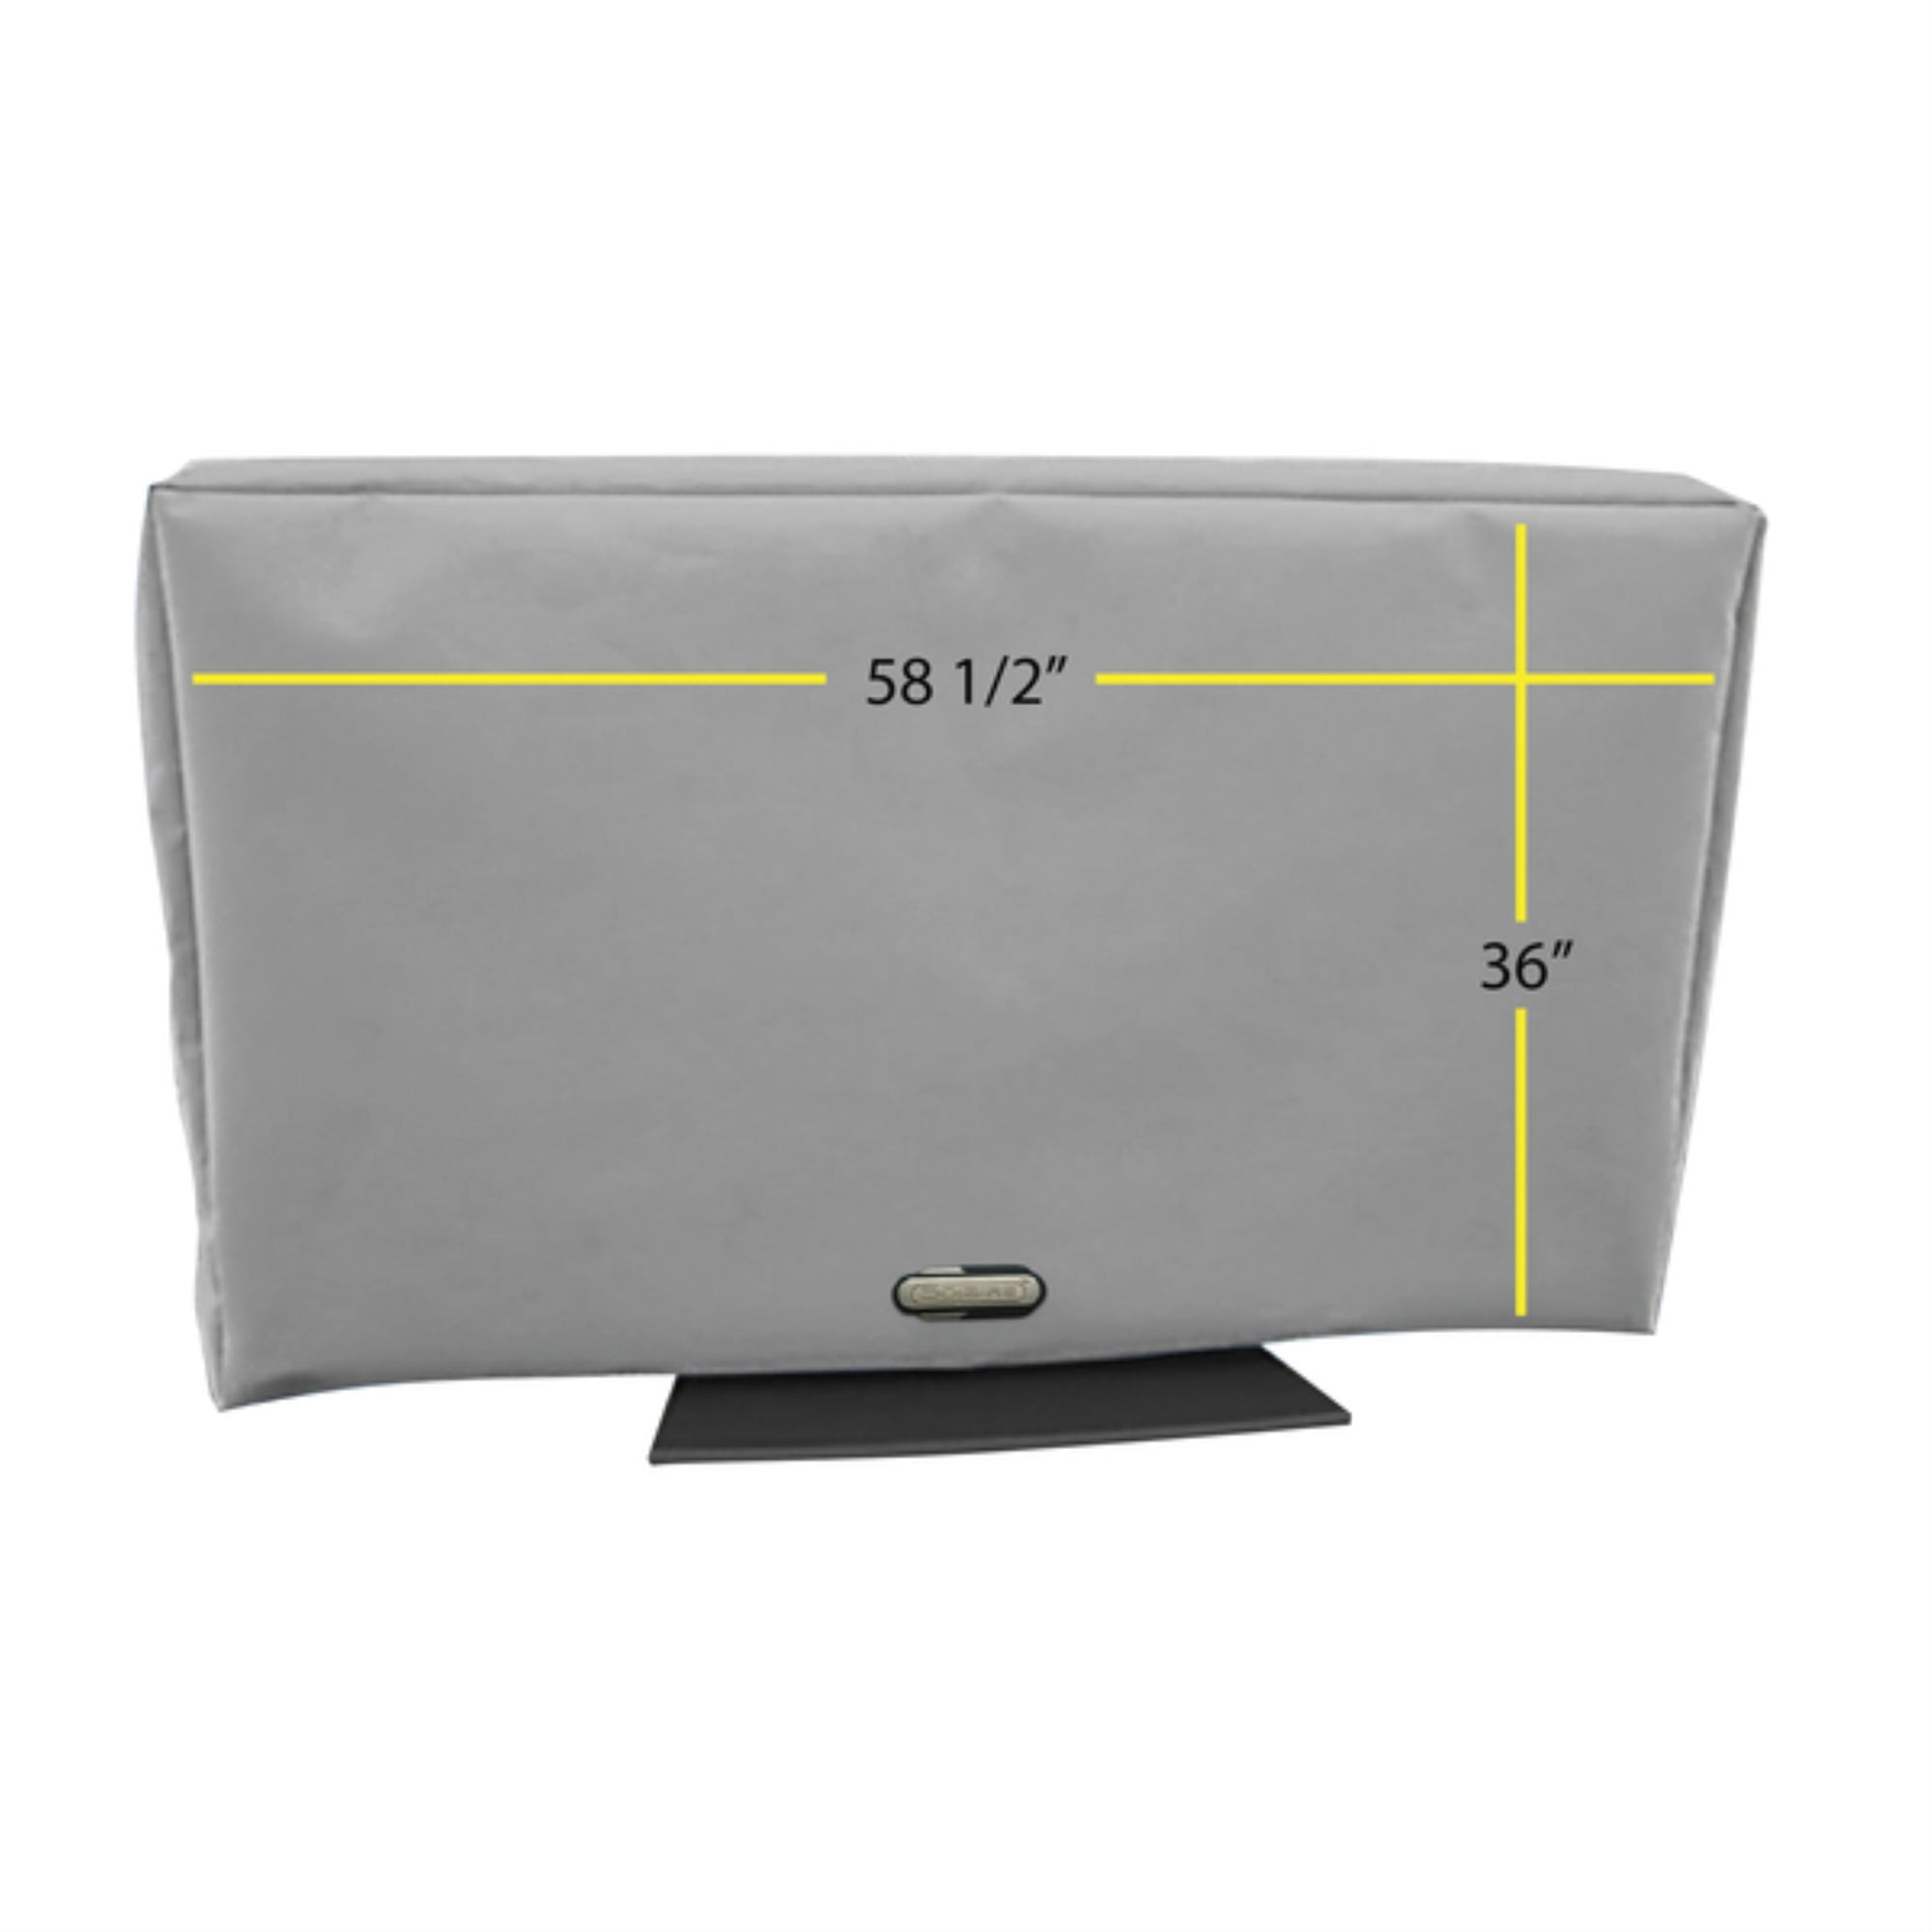 Waterproof TV Protector Cover Outdoor Cover for 22-24’’ 30-32’’ 36-38’’ 40-42’’ 